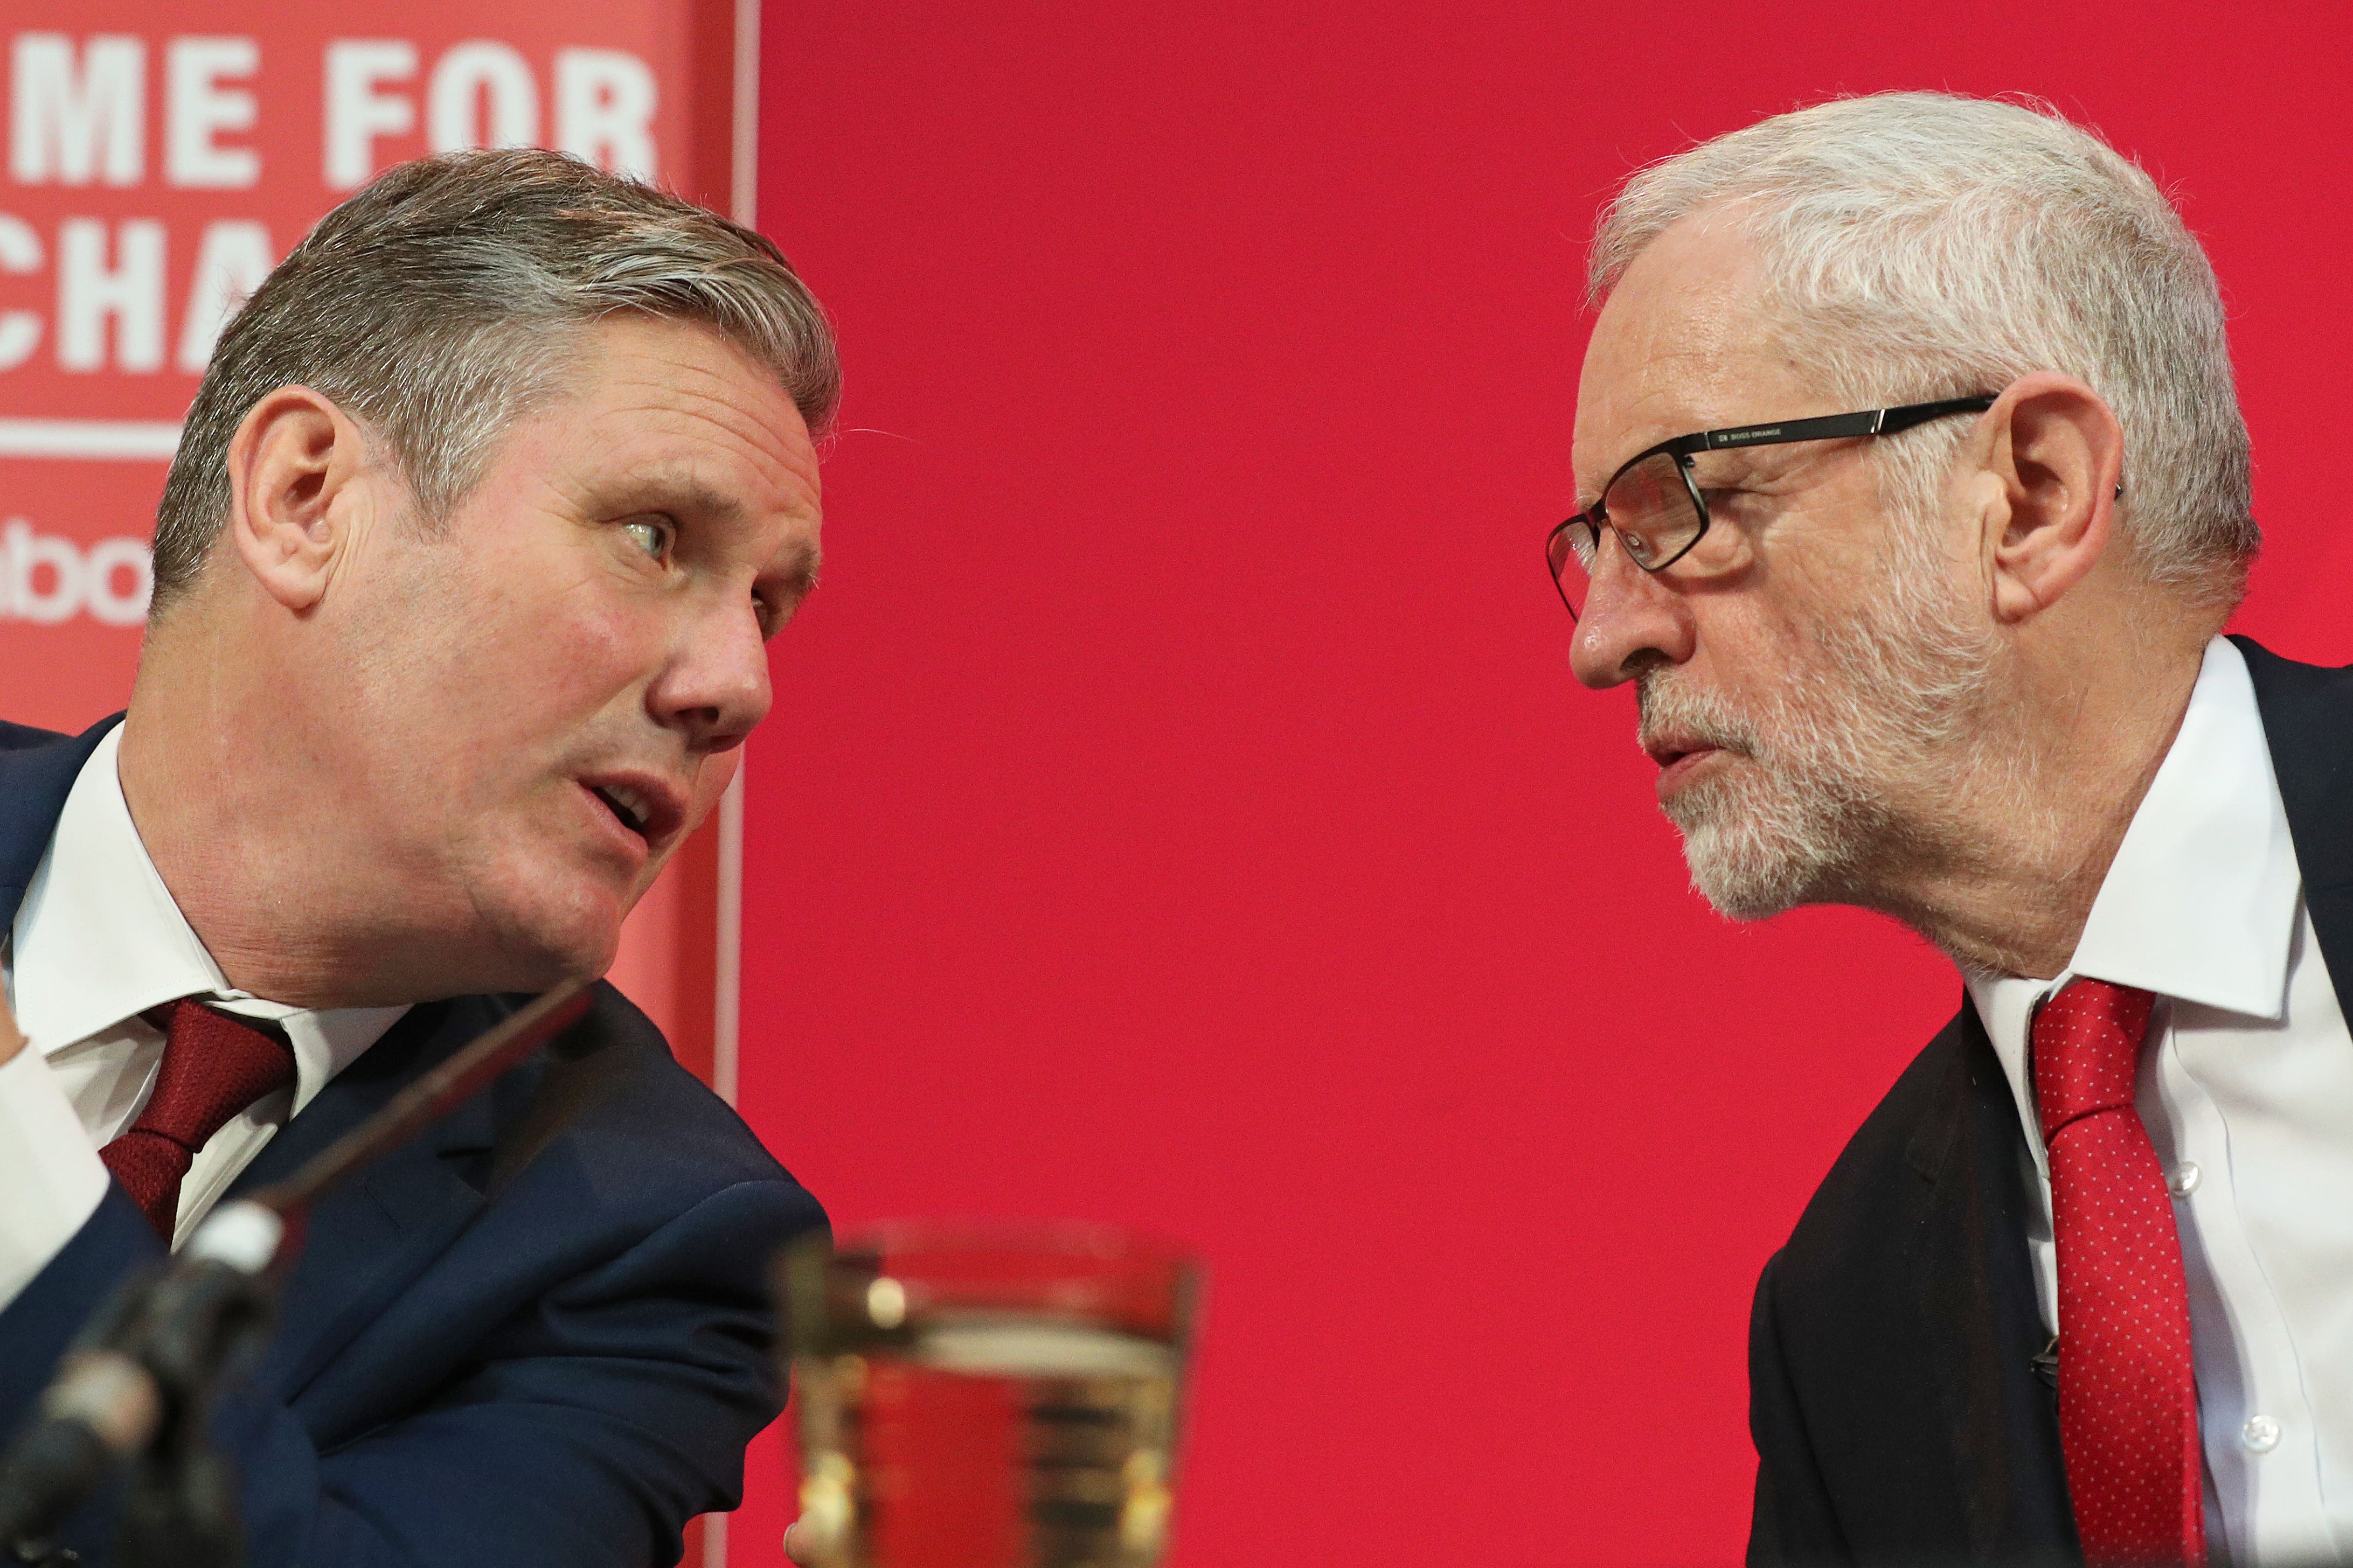 Then Labour Party leader Jeremy Corbyn with shadow Brexit secretary Keir Starmer at a press conference in London in 2019